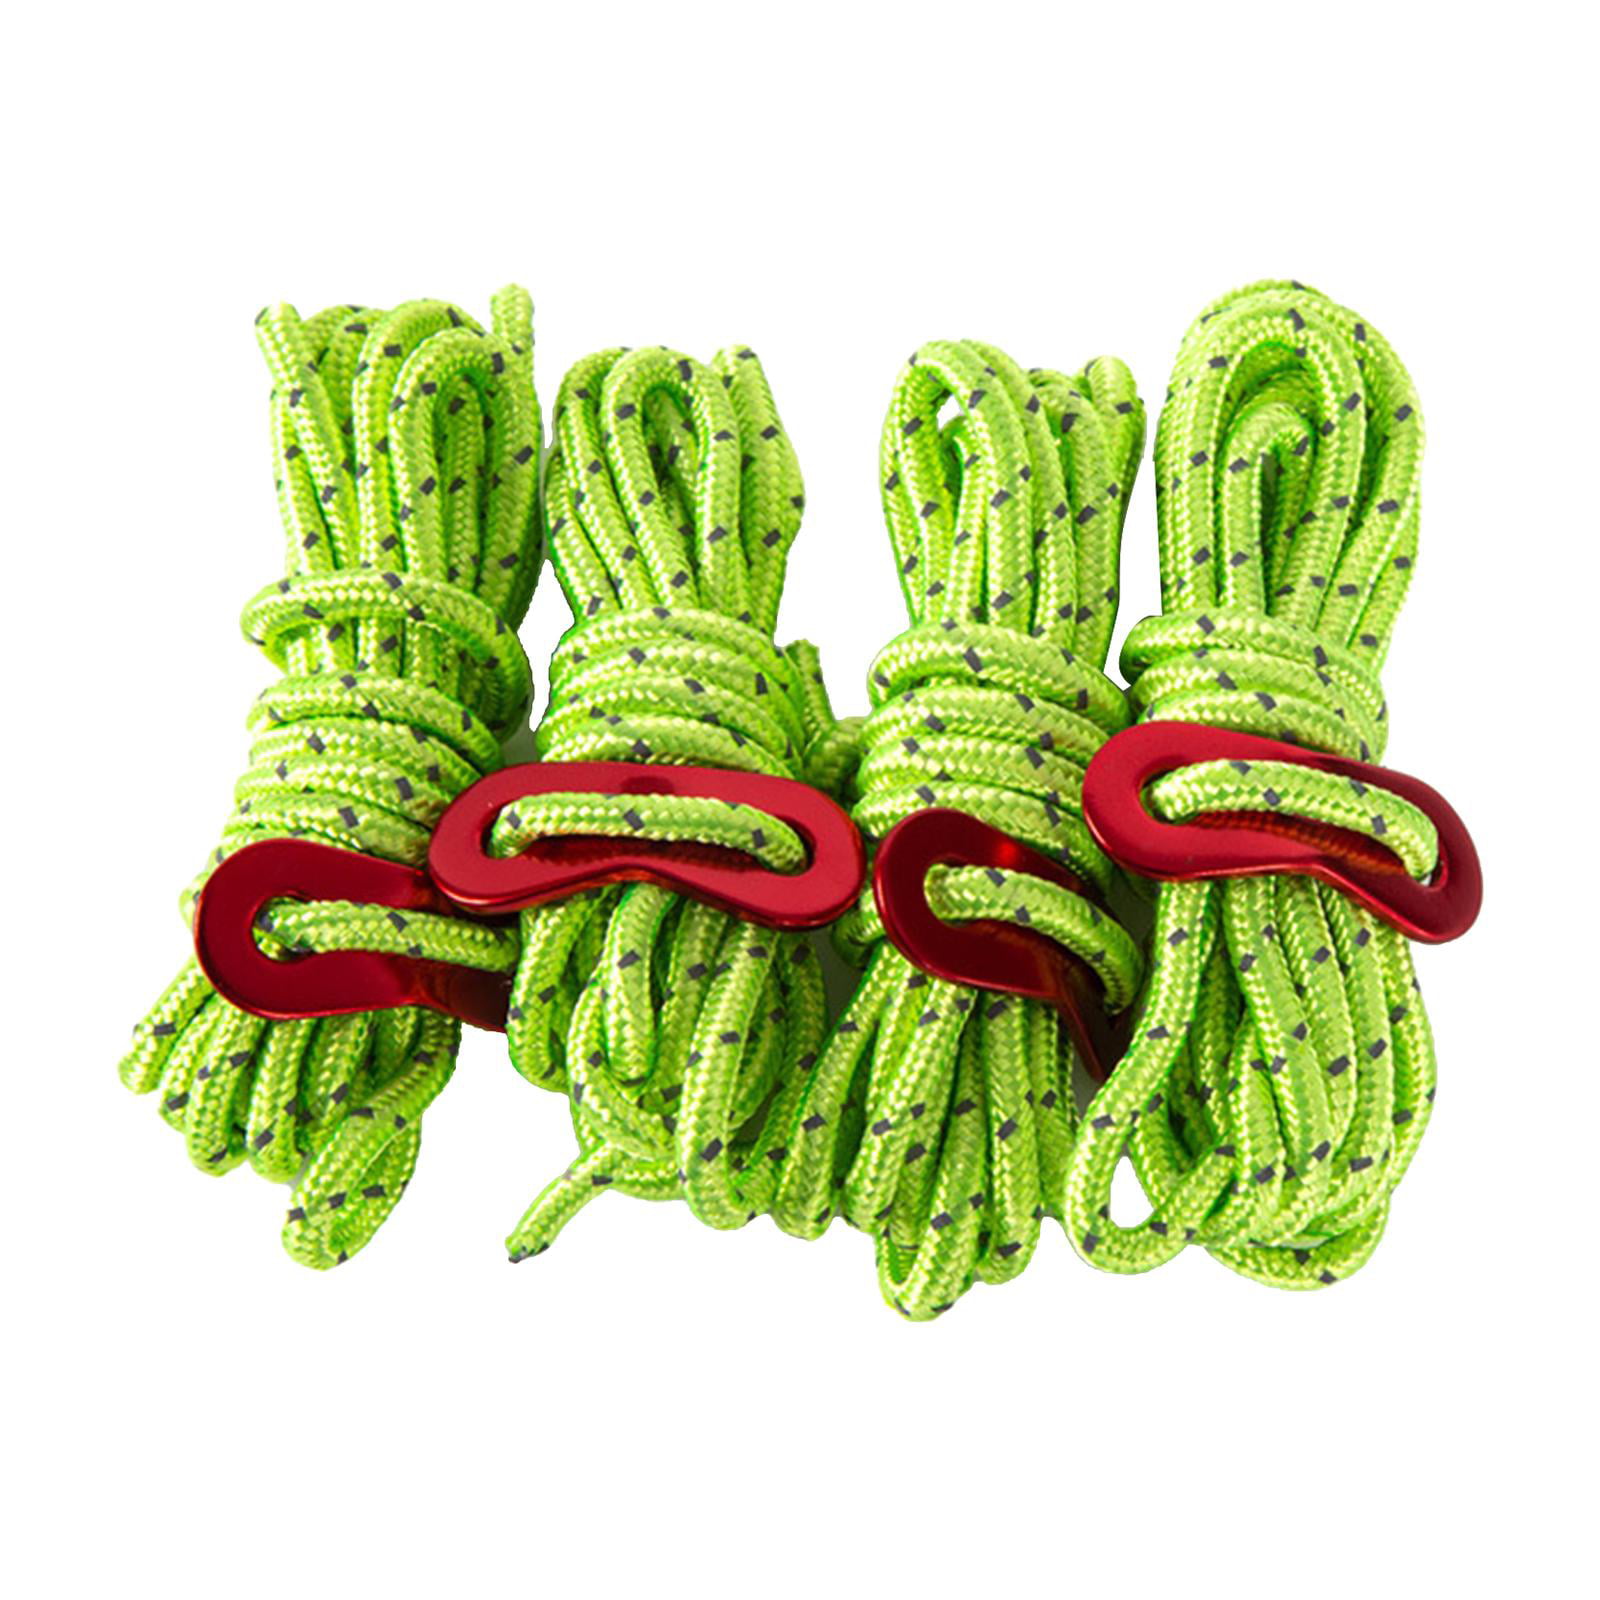 X5 GLOW IN THE DARK Guy Line Rope GUYLINE RUNNERS Camping Tent Tensioners ropes 